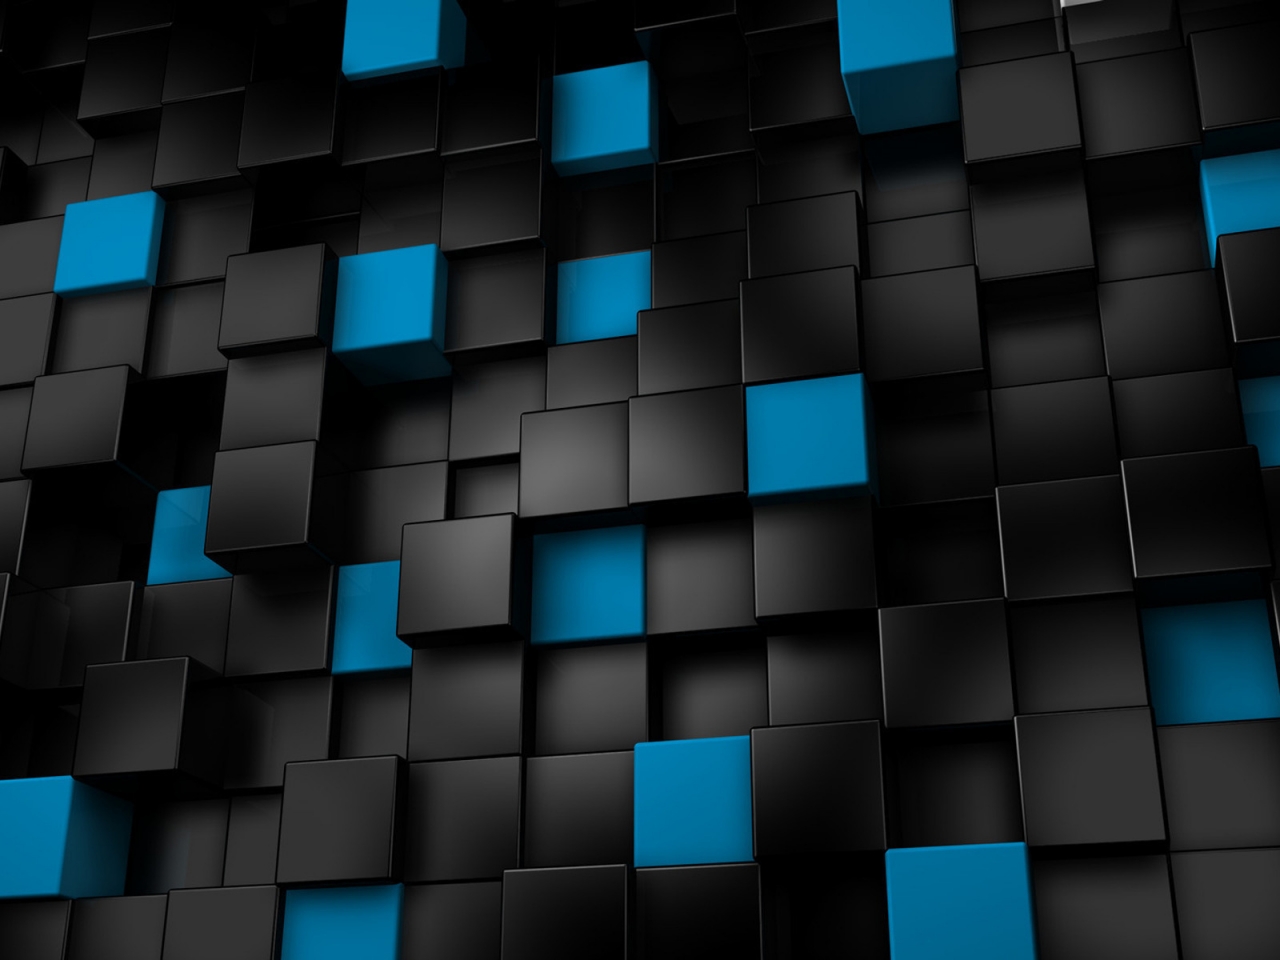 Black & Blue Cubes for 1280 x 960 resolution